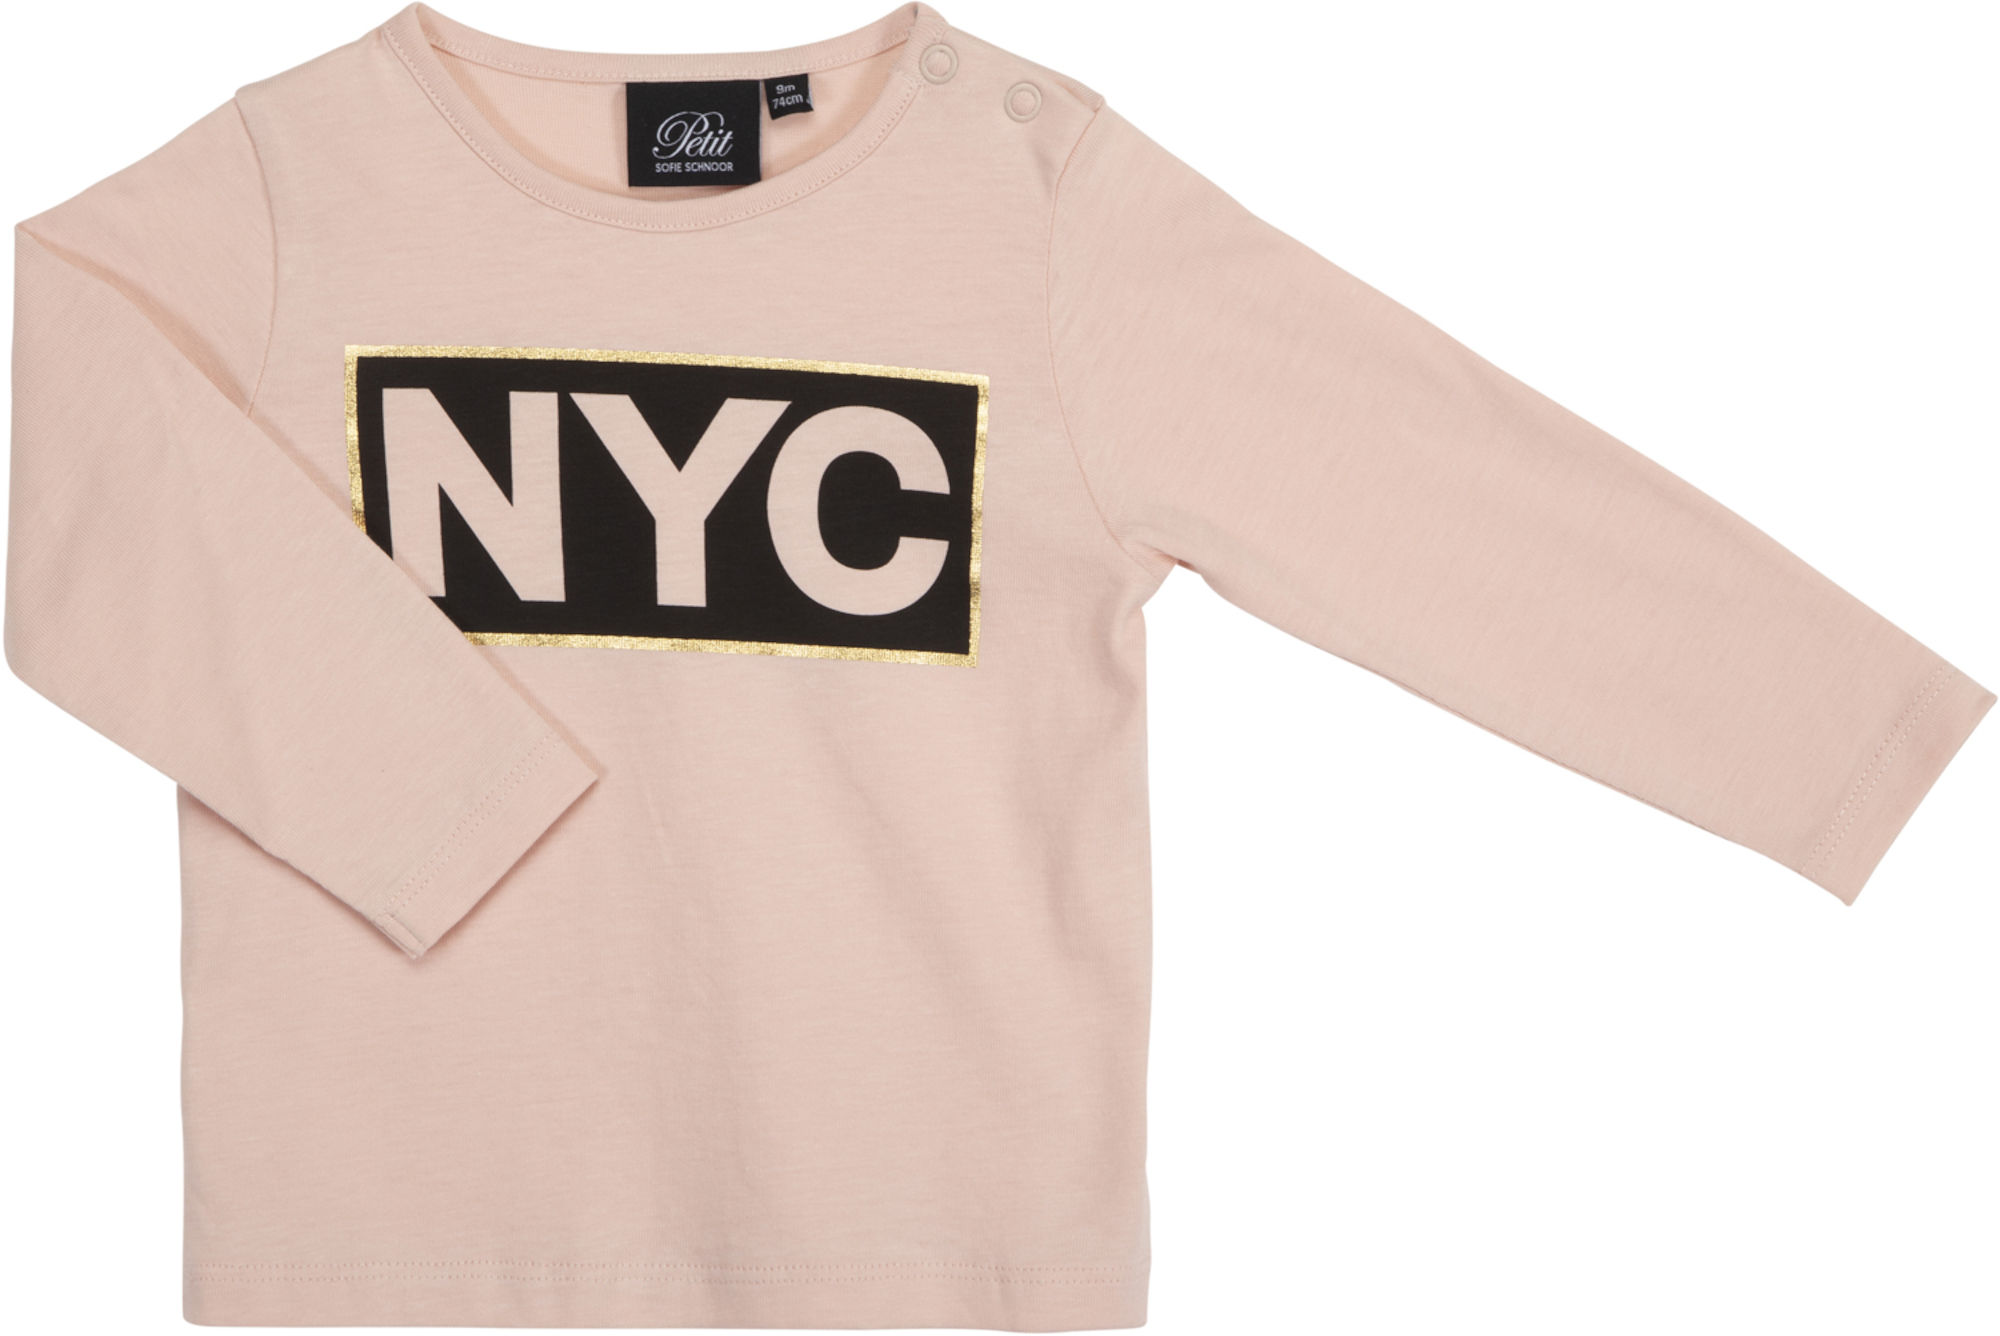 Petit By Sofie Schnoor NYC Shirt Cameo rose Stl 74